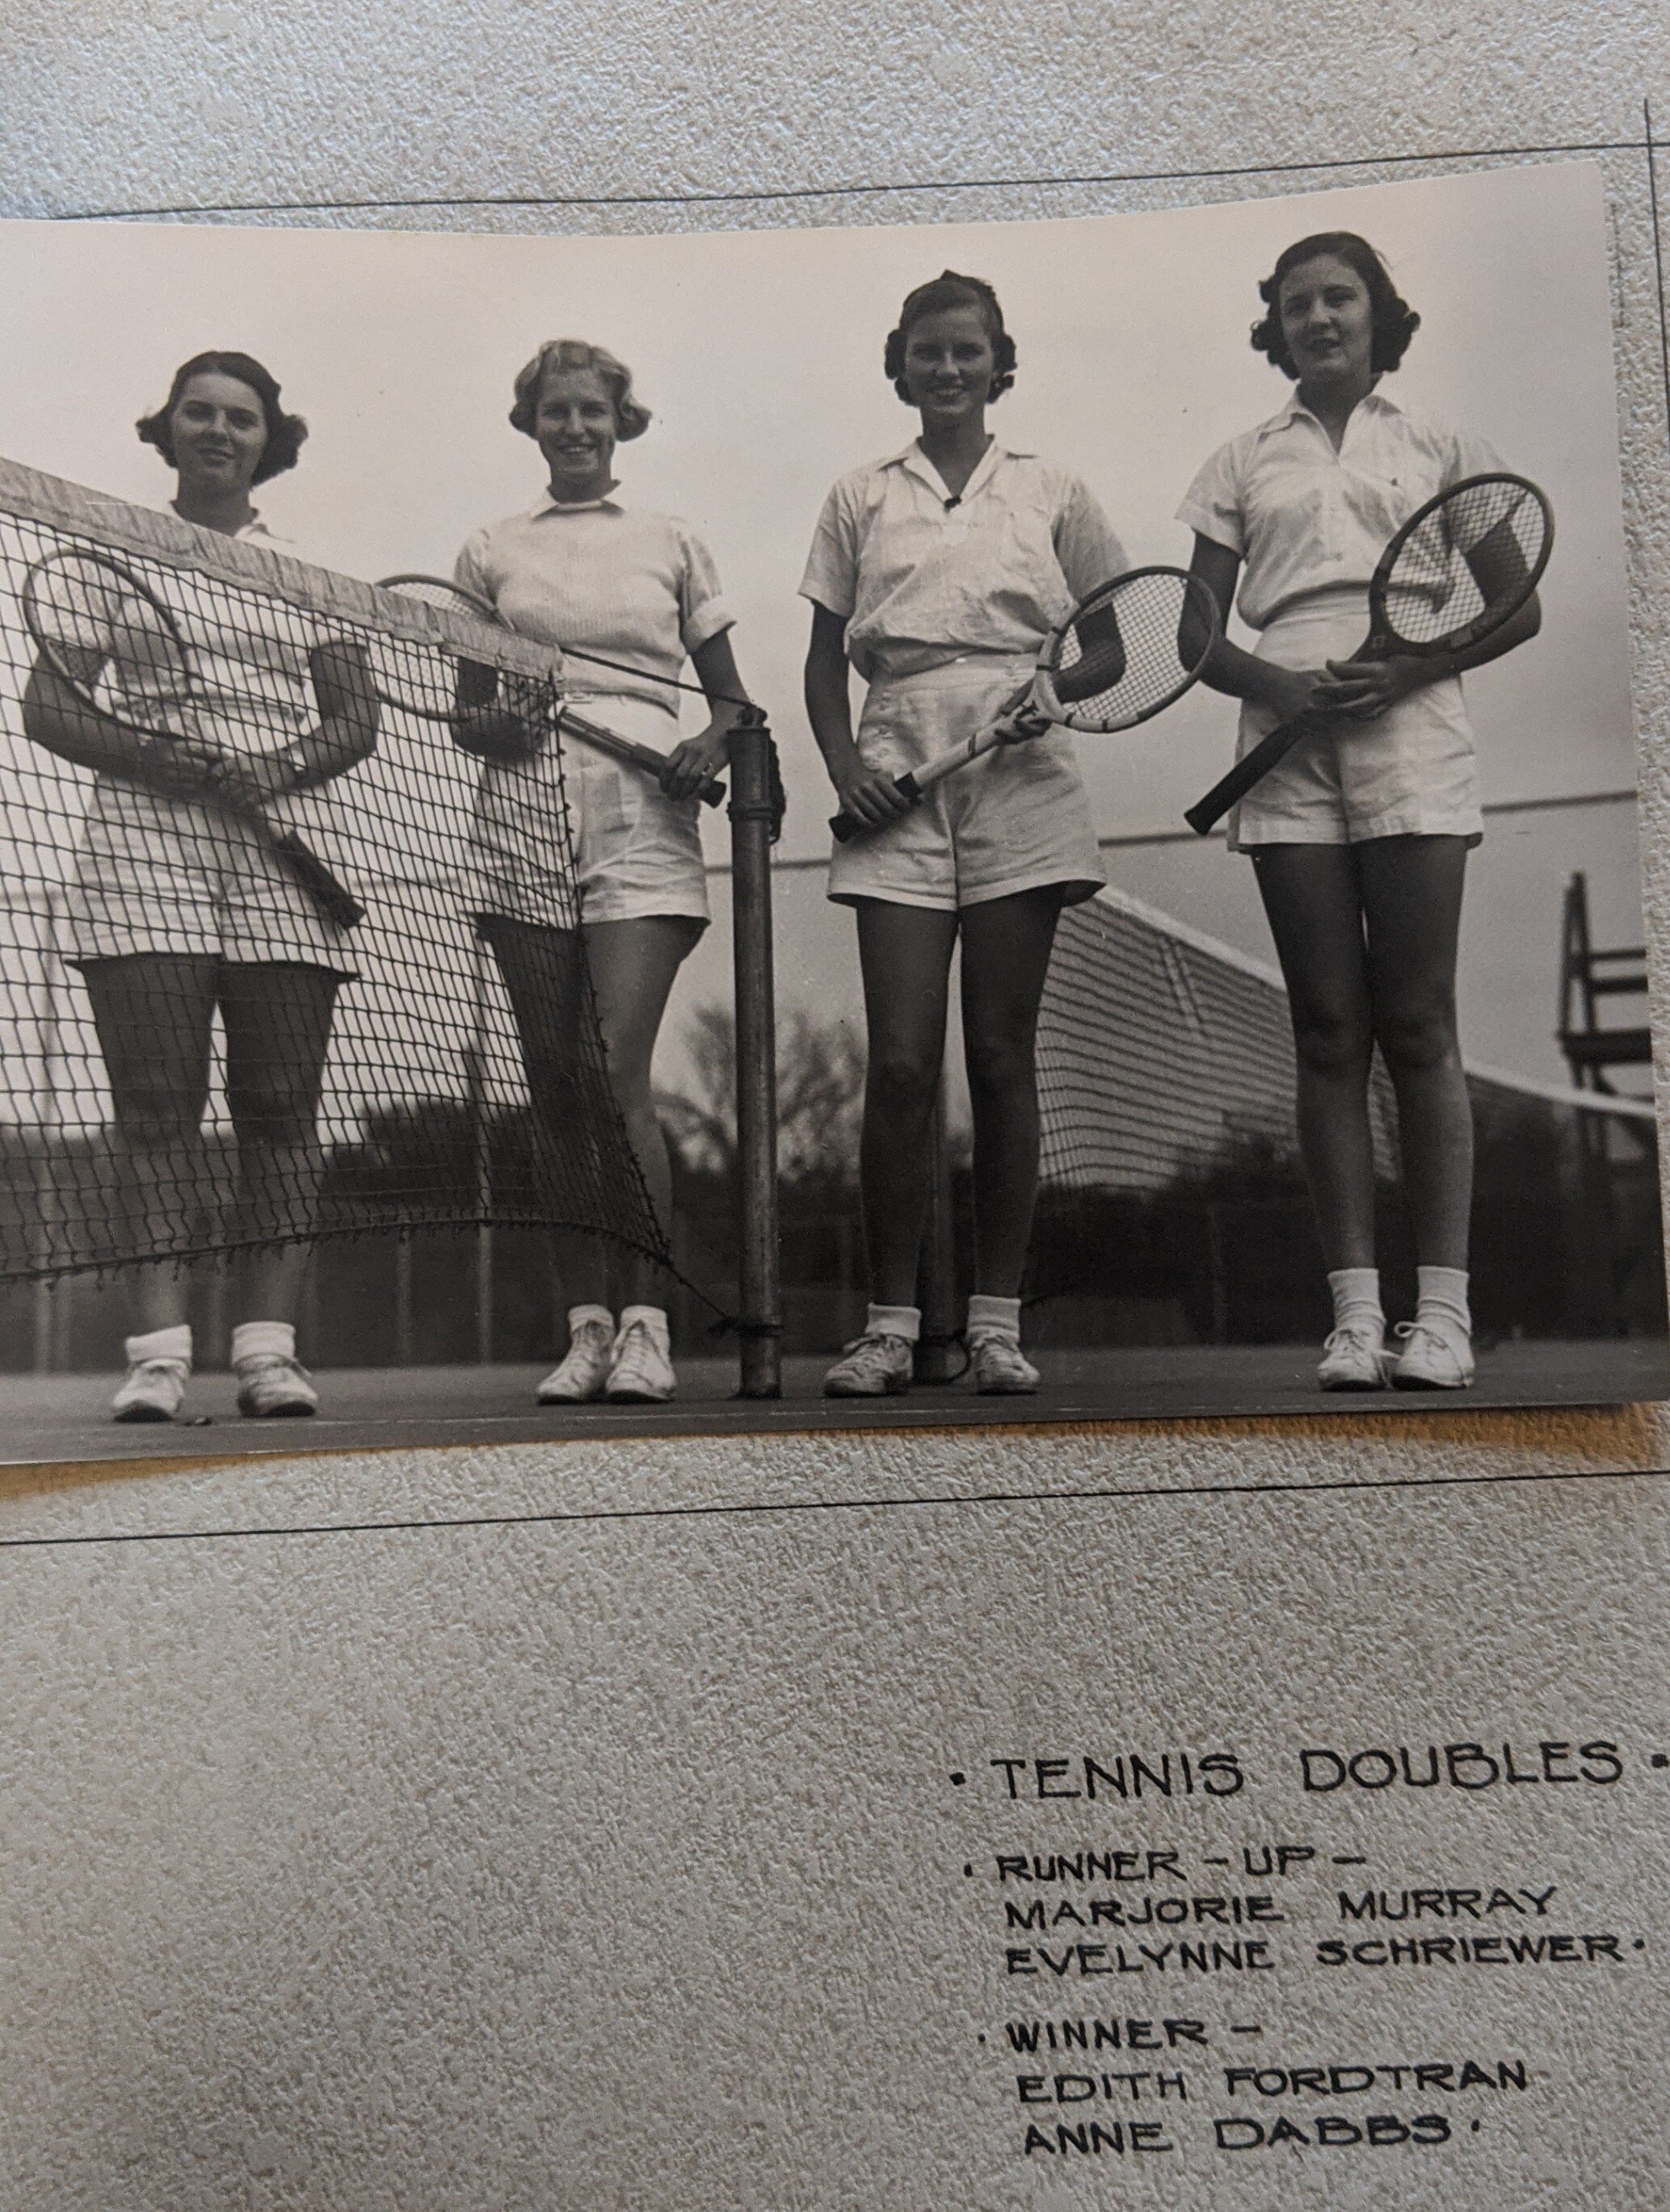 1948 tennis left Marjorie Murray and Evelynne Schriewer winners right Edith Fordtran and Anne Dabbs